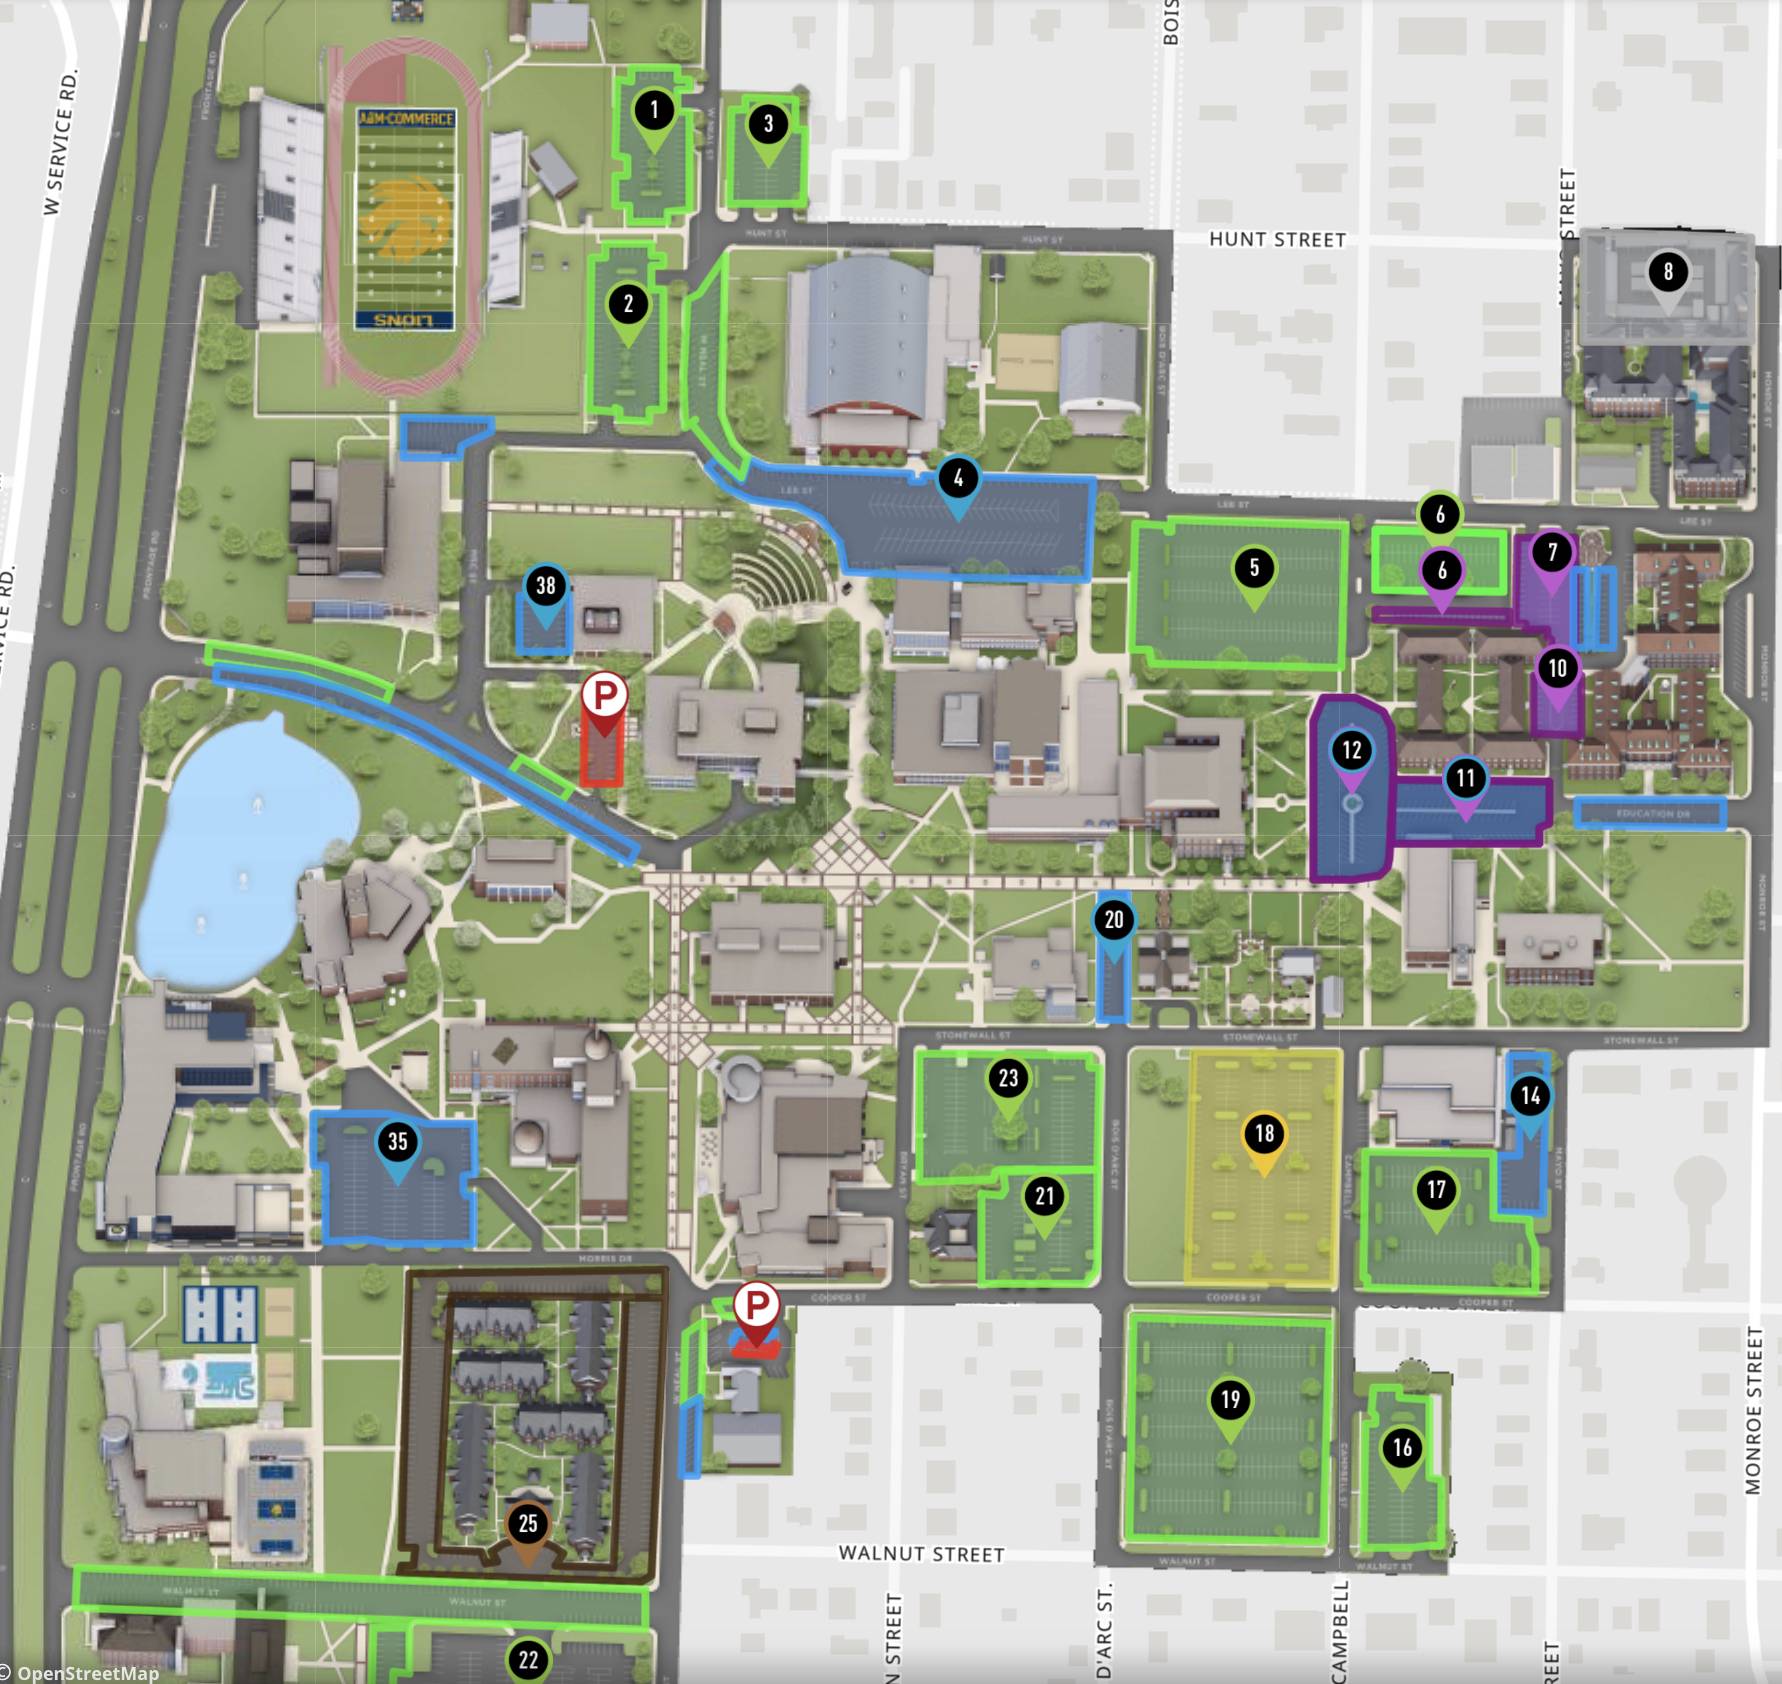 Campus map with parking lots outlined.